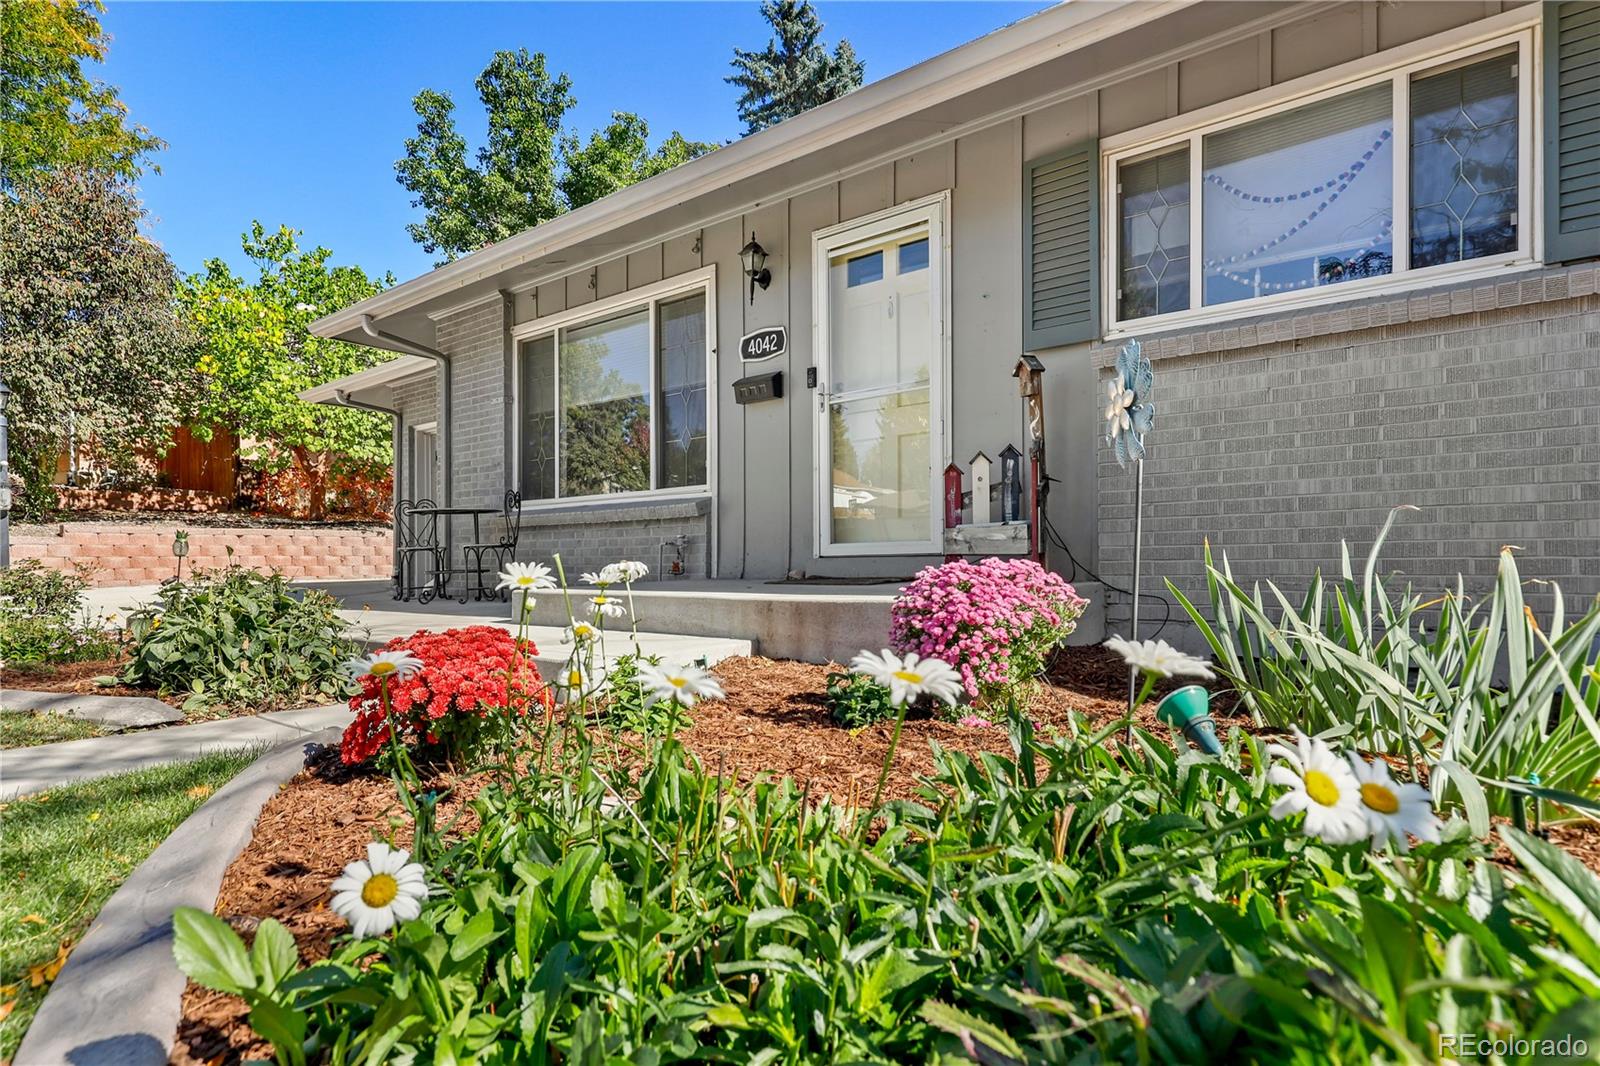 4042 w greenwood place, Denver sold home. Closed on 2024-03-01 for $555,000.